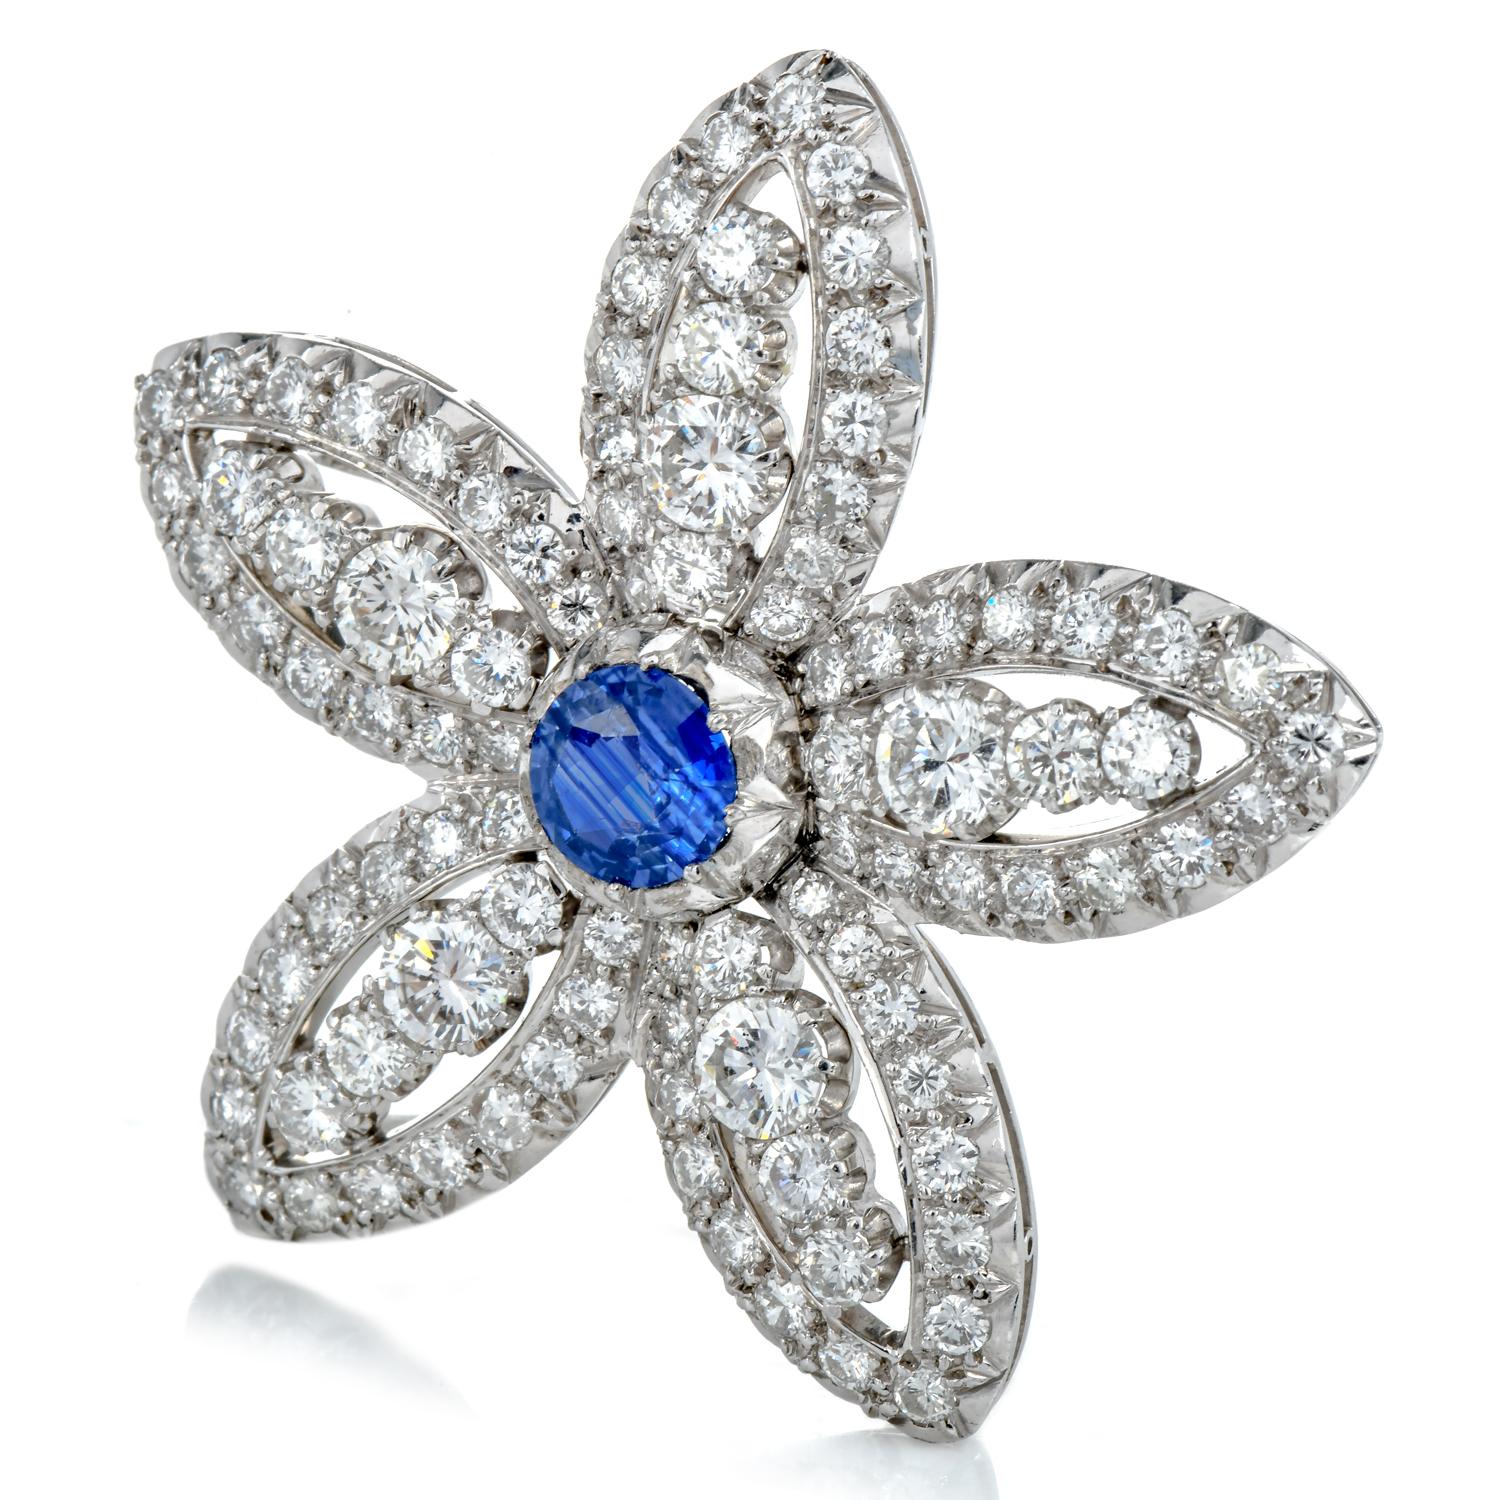 This sparkly GIA Blue Sapphire & Diamond Platinum Star Flower Brooch Pin is the perfect enhancement for a scarf or blouse.

Crafted in Platinum, it has a timeless appeal and a lustrous shine.

The focal point of this piece is the Deep Blue Center